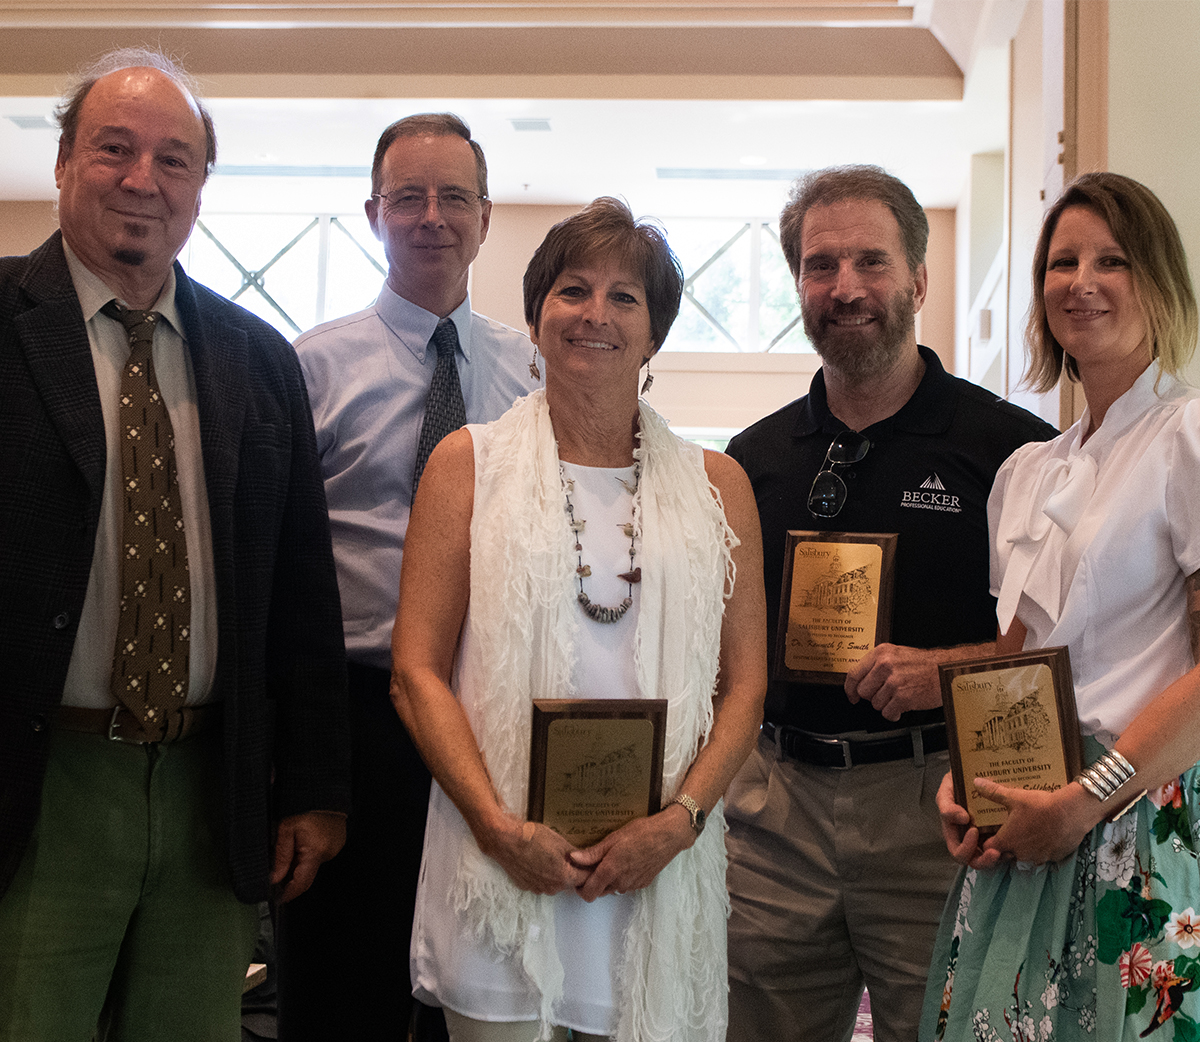 From left: Dr. James Forte, Distinguished Faculty Award Committee chair; SU President Charles Wight; and Drs. Lisa Seldomridge, Ken Smith and Michèle Schlehofer, recipients.